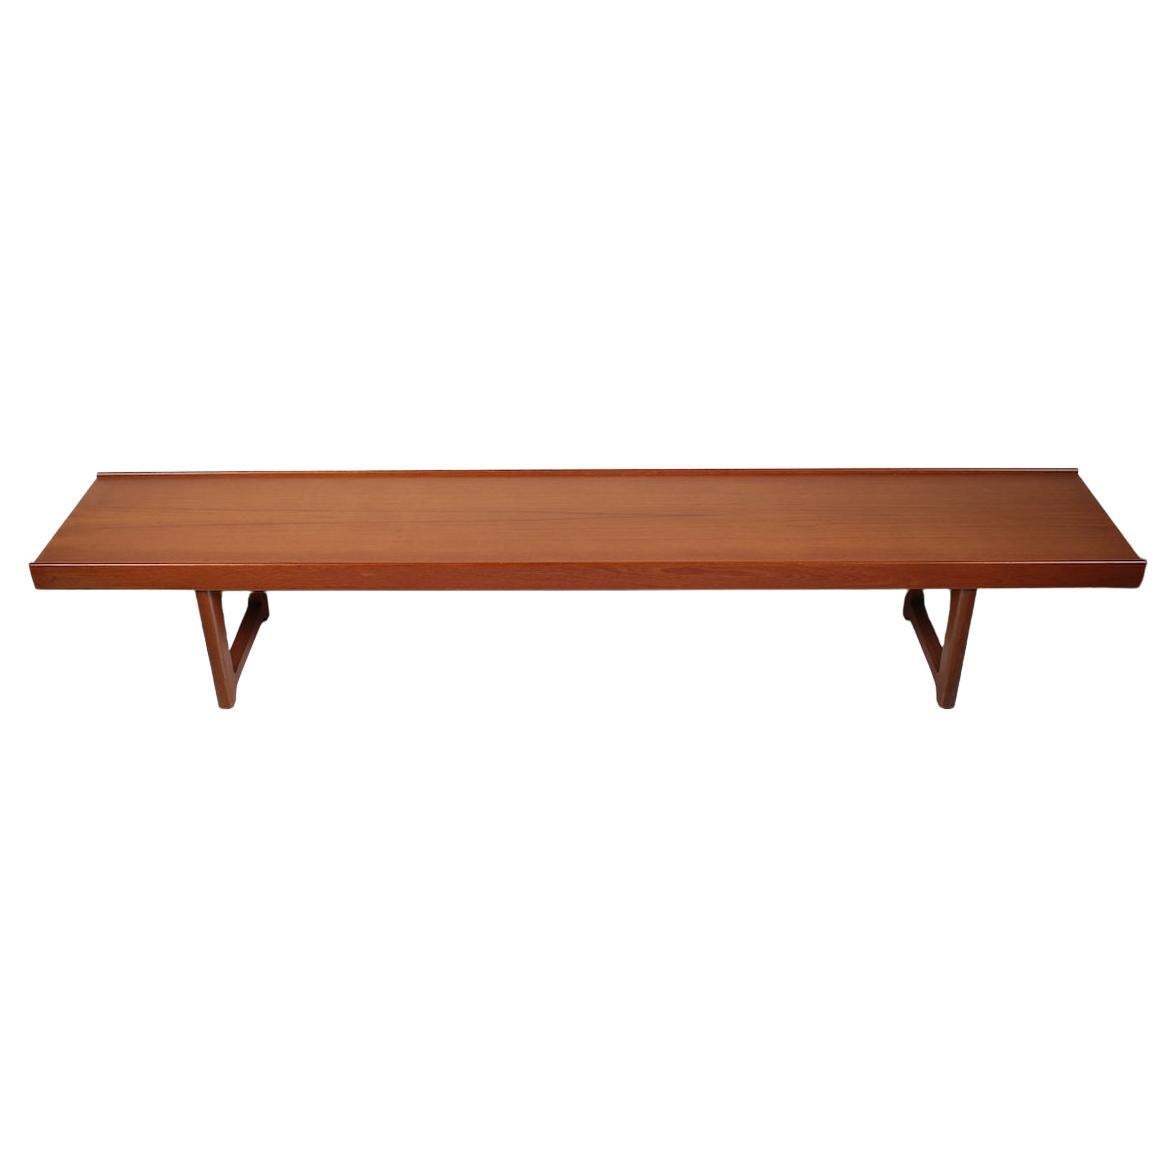 Long Torbjorn Afdal solid Teak Table, Bench by Bruksbo Mellenstrands Norway. Featuring a longer lower lipped rectangular framework in smoothly grained Teak, with Steel supported legs. Sturdy. Balanced. Versatile.  Made in Norway.  With label to